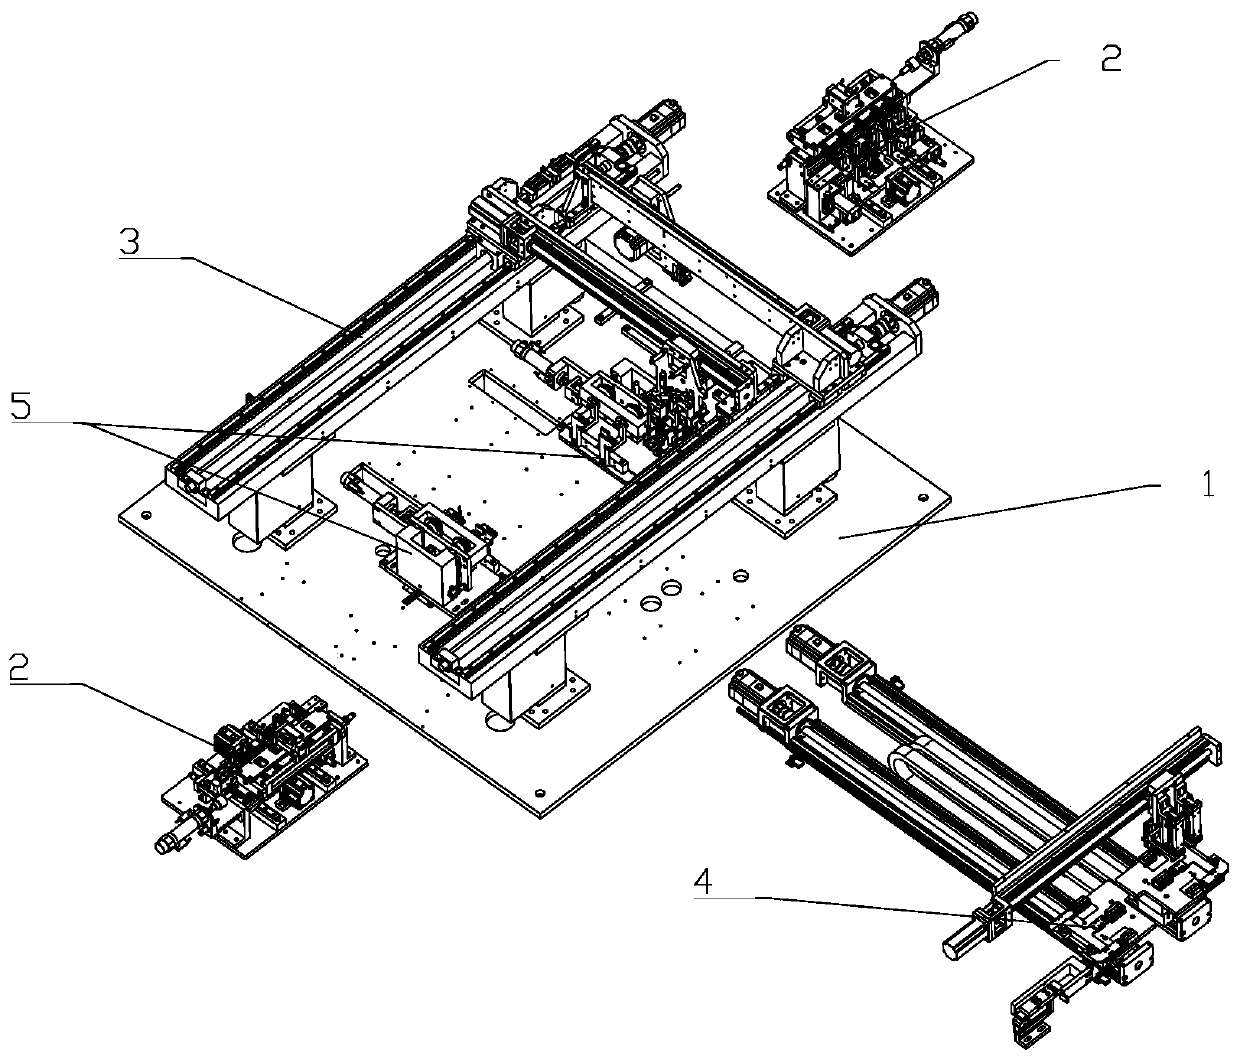 Capacitor feeding device for capacitor set assembly equipment